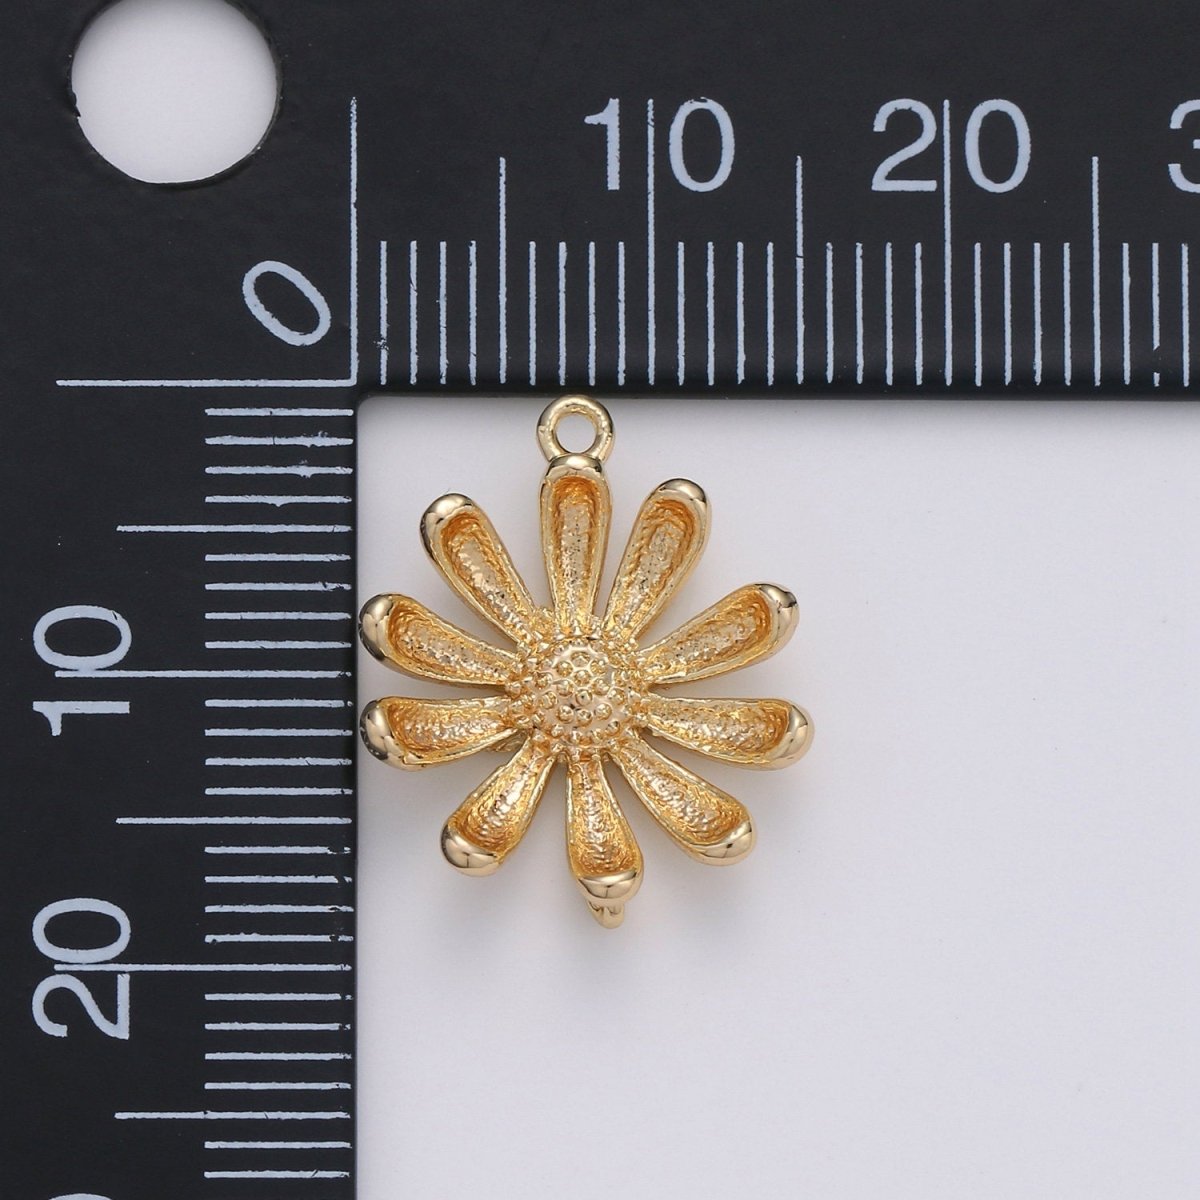 Gold Daisy Charms, Flower Charms, daisy Pendant Gold flower Charms for jewellery Making Necklace, Bracelet Earring Component K-575 - DLUXCA